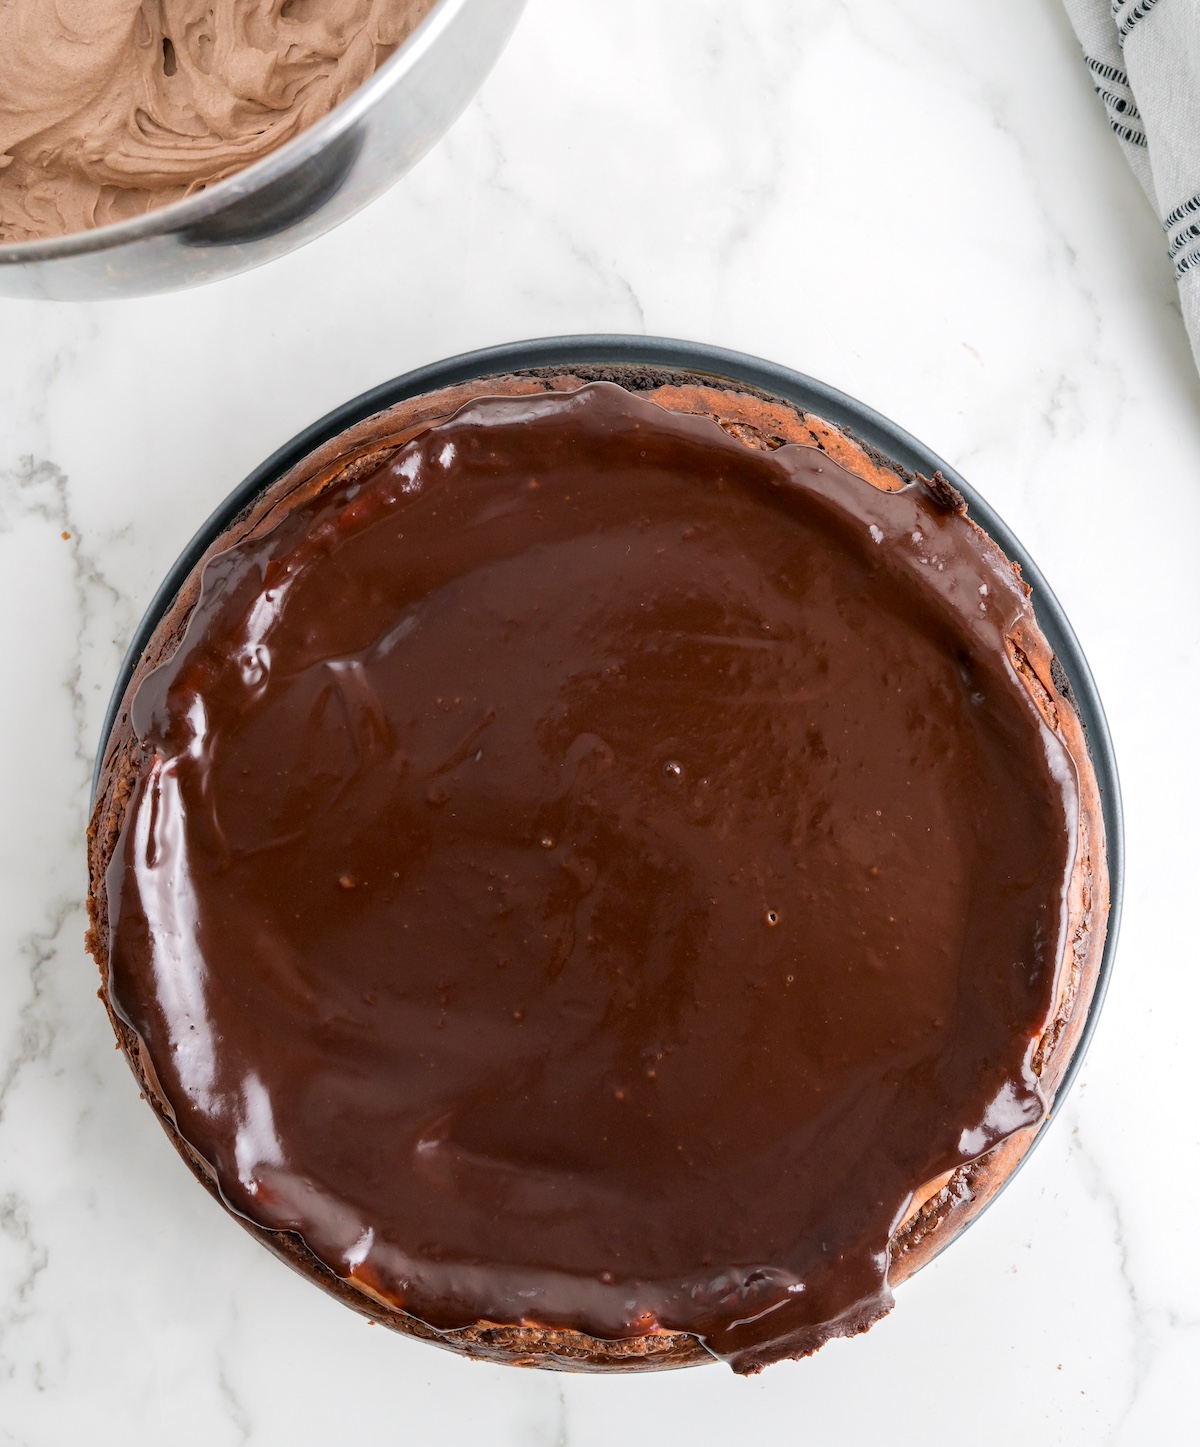 top the cake with the chocolate ganache